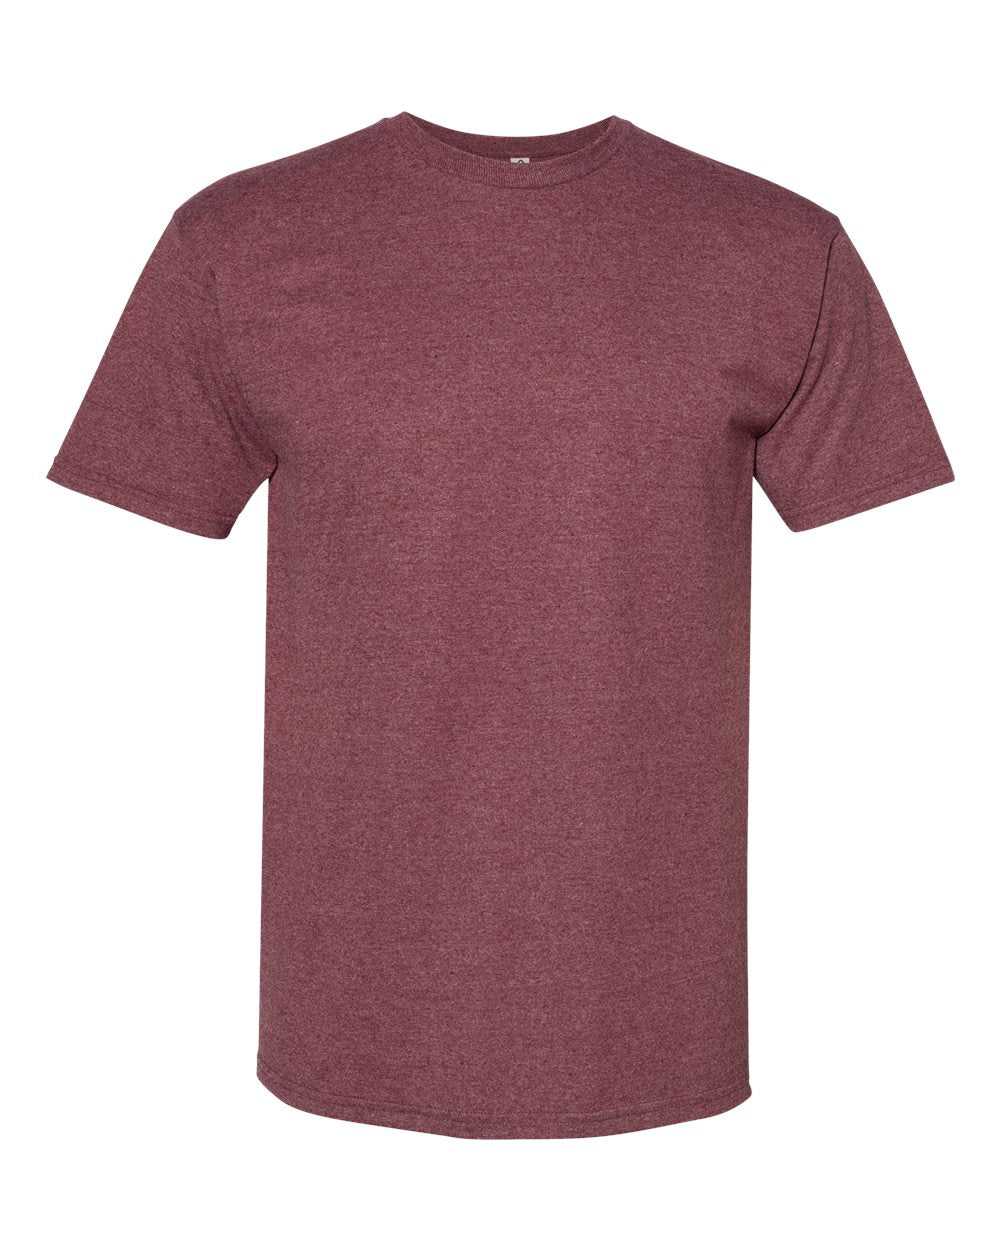 American Apparel 1701 Midweight Cotton Unisex T-Shirt - Burgundy Heather - HIT a Double